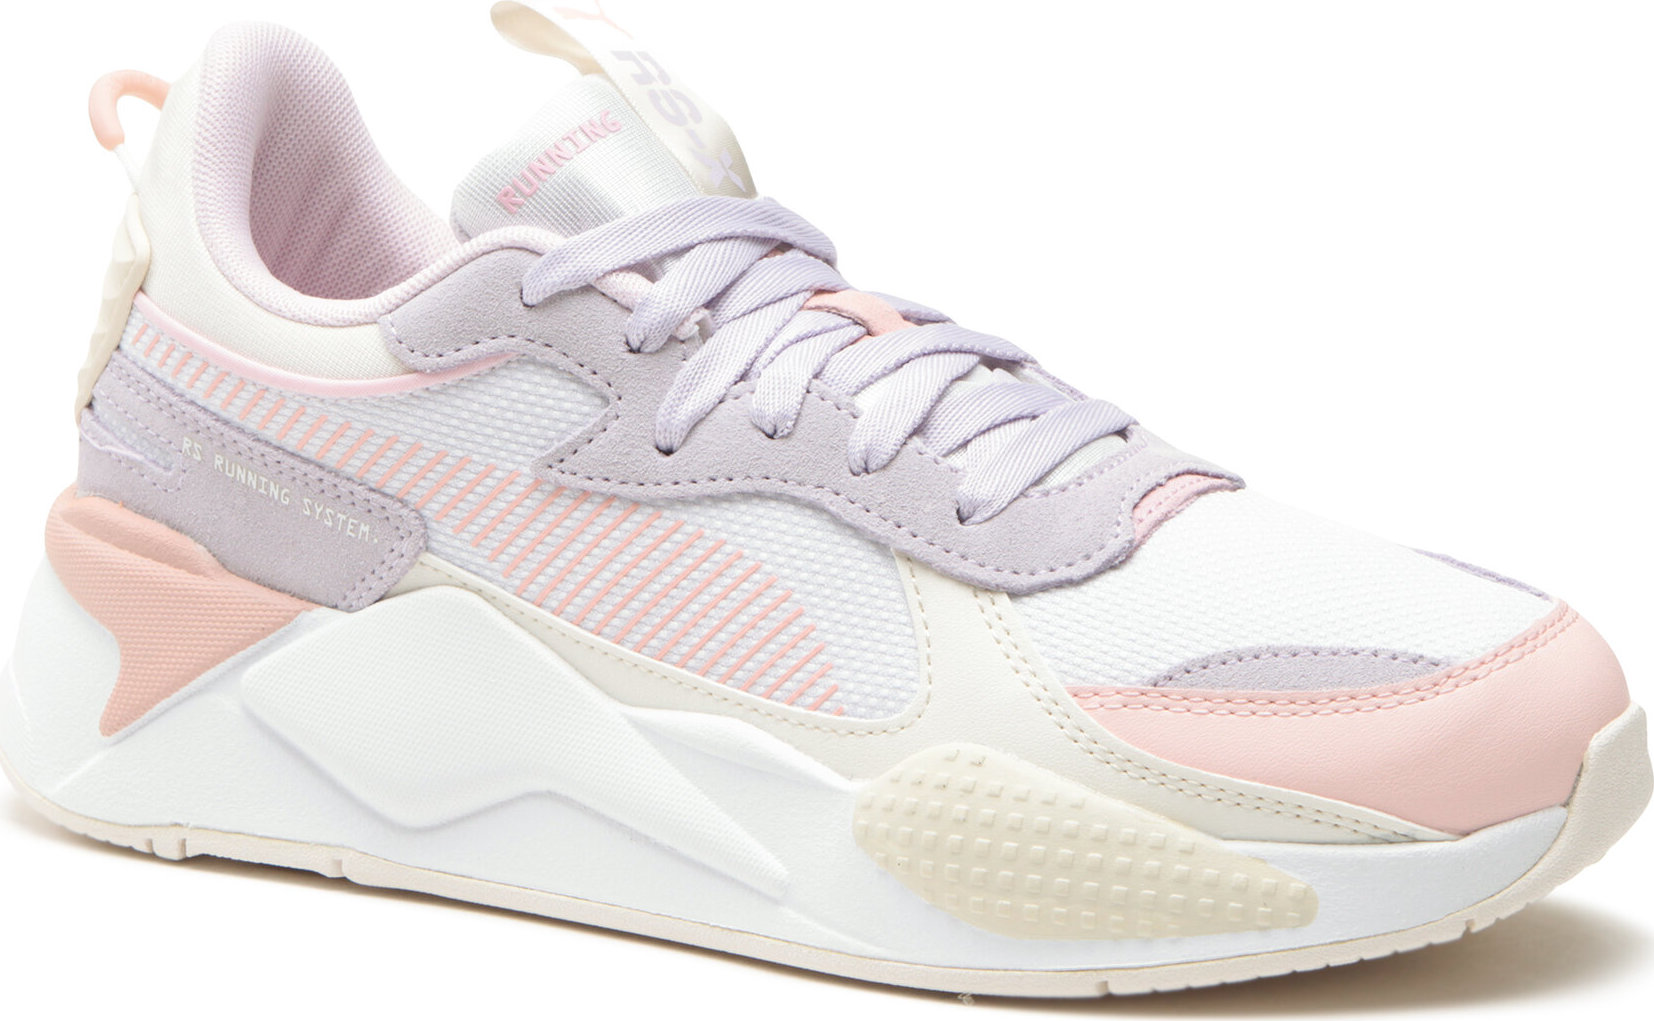 Sneakersy Puma RS-X Candy Wns 390647 01 Puma White/Spring Lavender